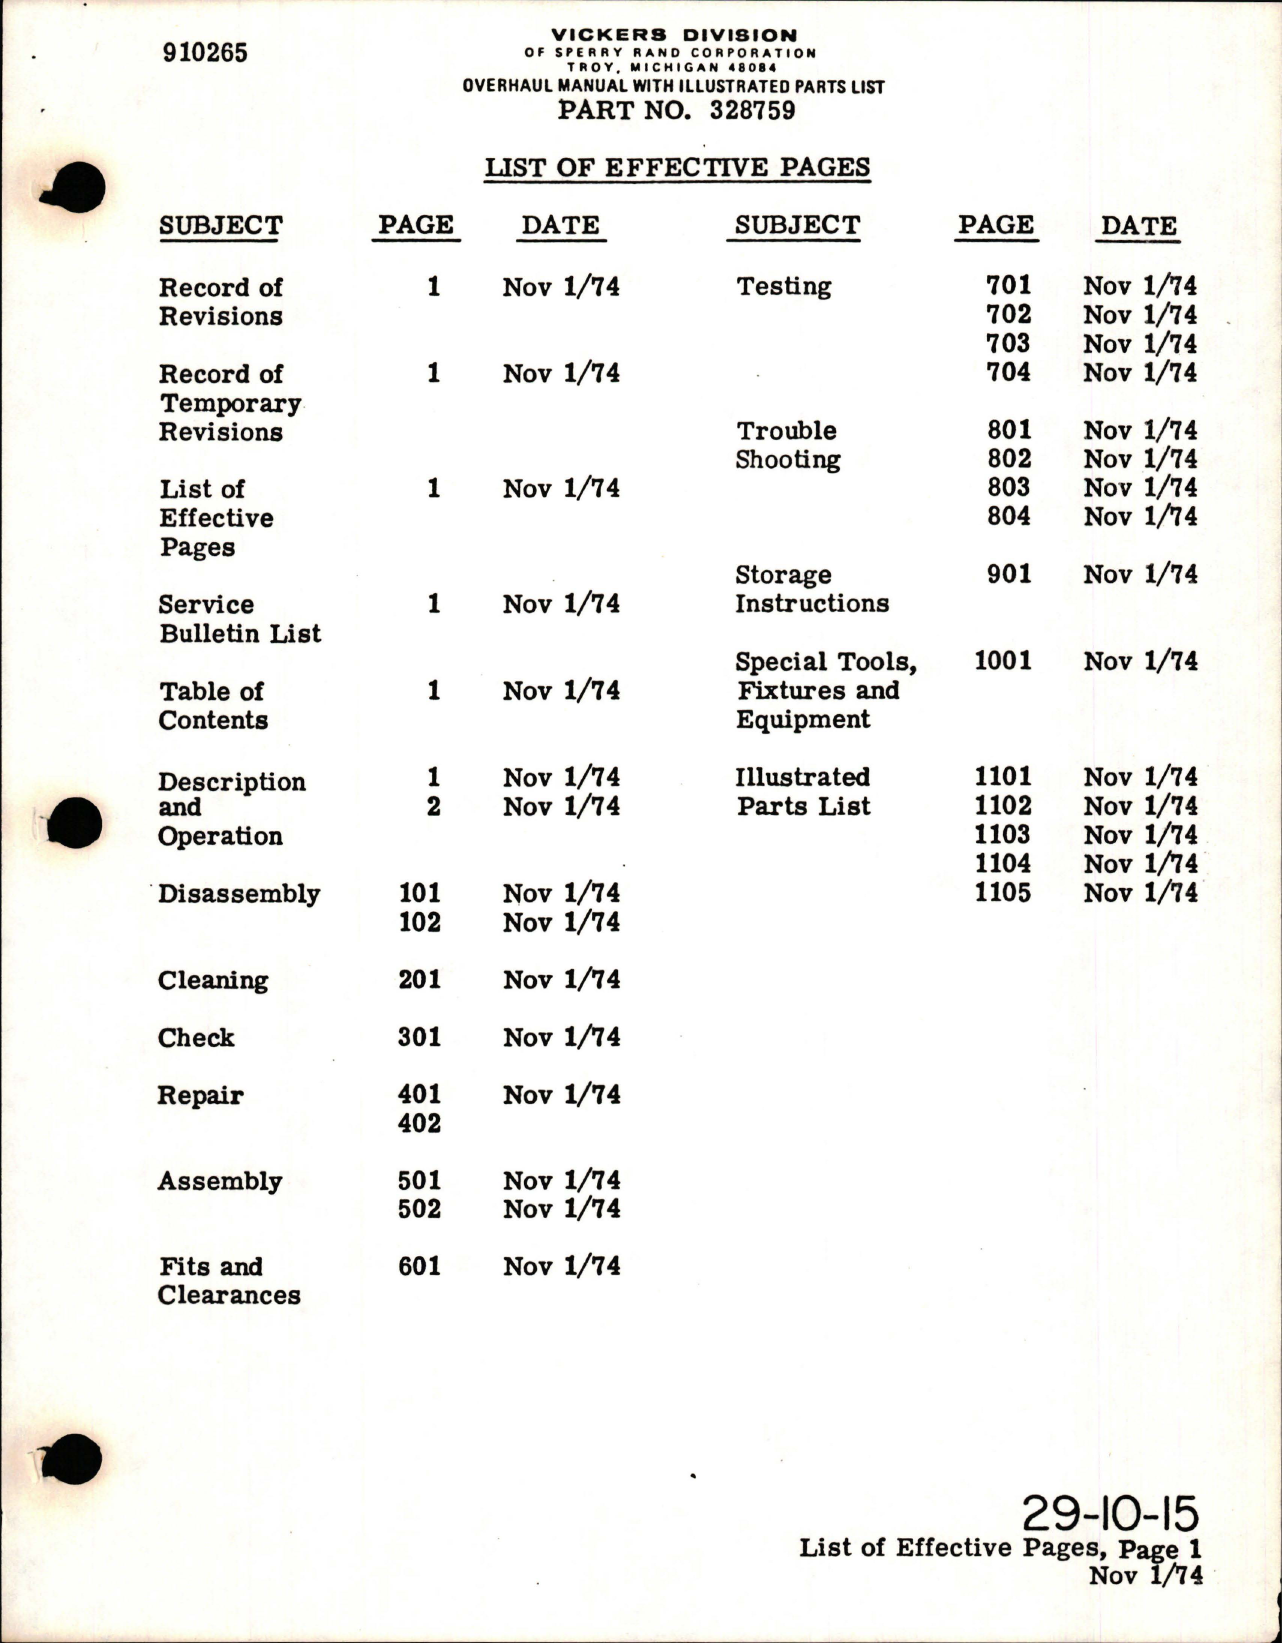 Sample page 7 from AirCorps Library document: Overhaul with Illustrated Parts List for Hydraulic Motorpump - Part 328759 - Model MPEV3-022-3A